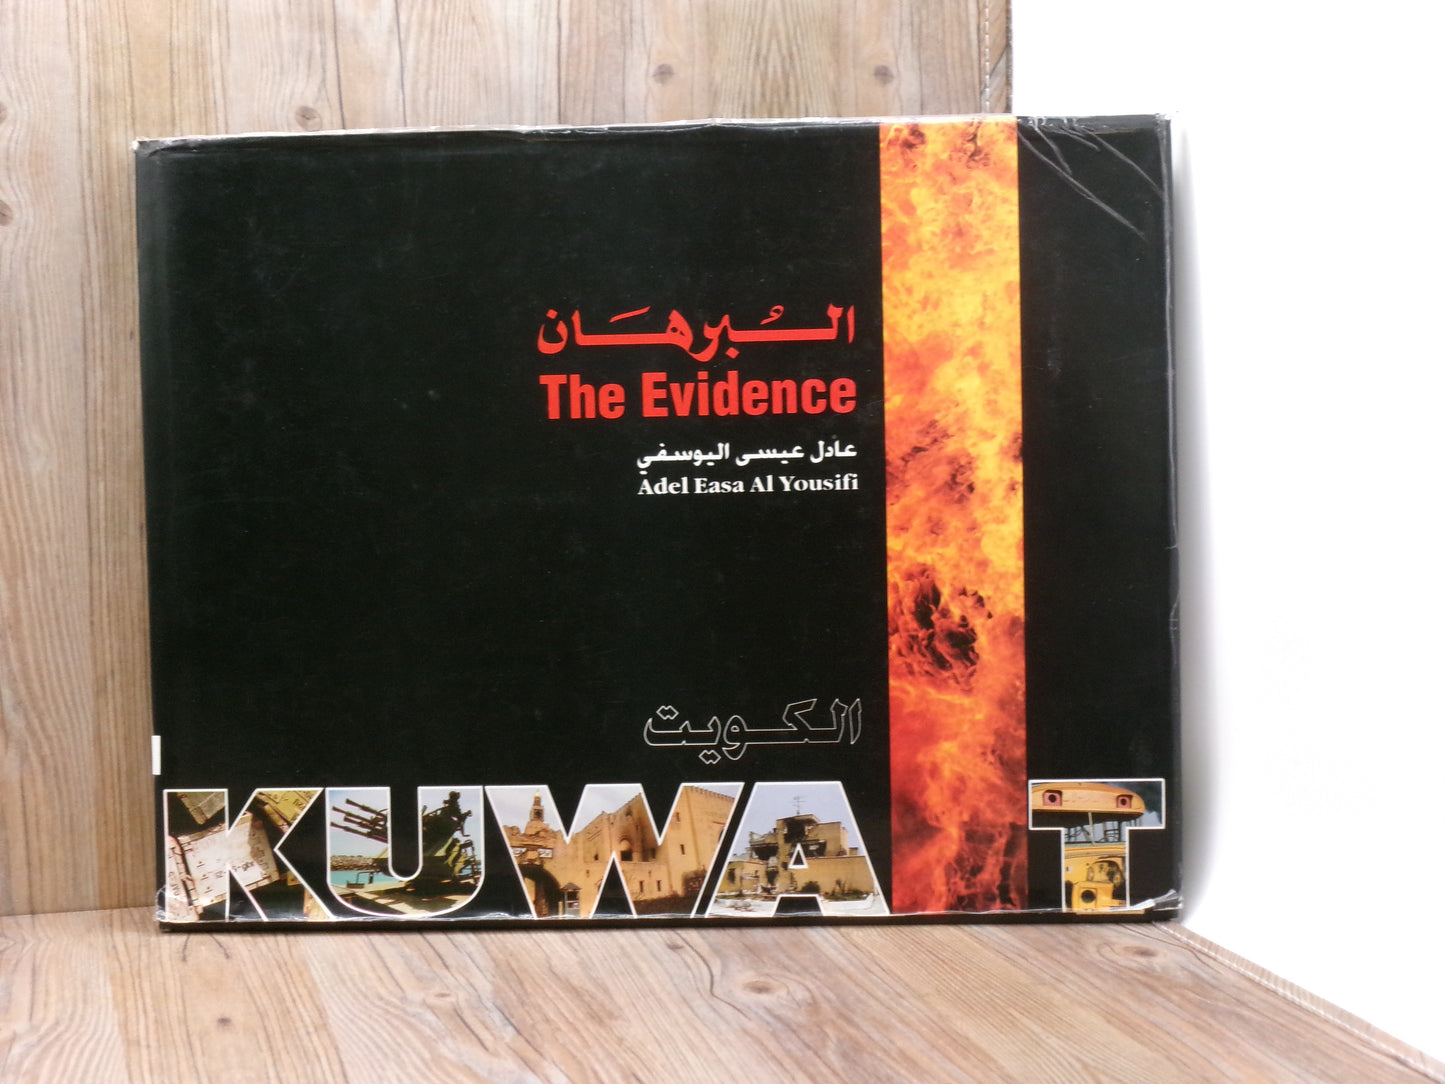 The Evidence by Adel Easa Al Yousifi